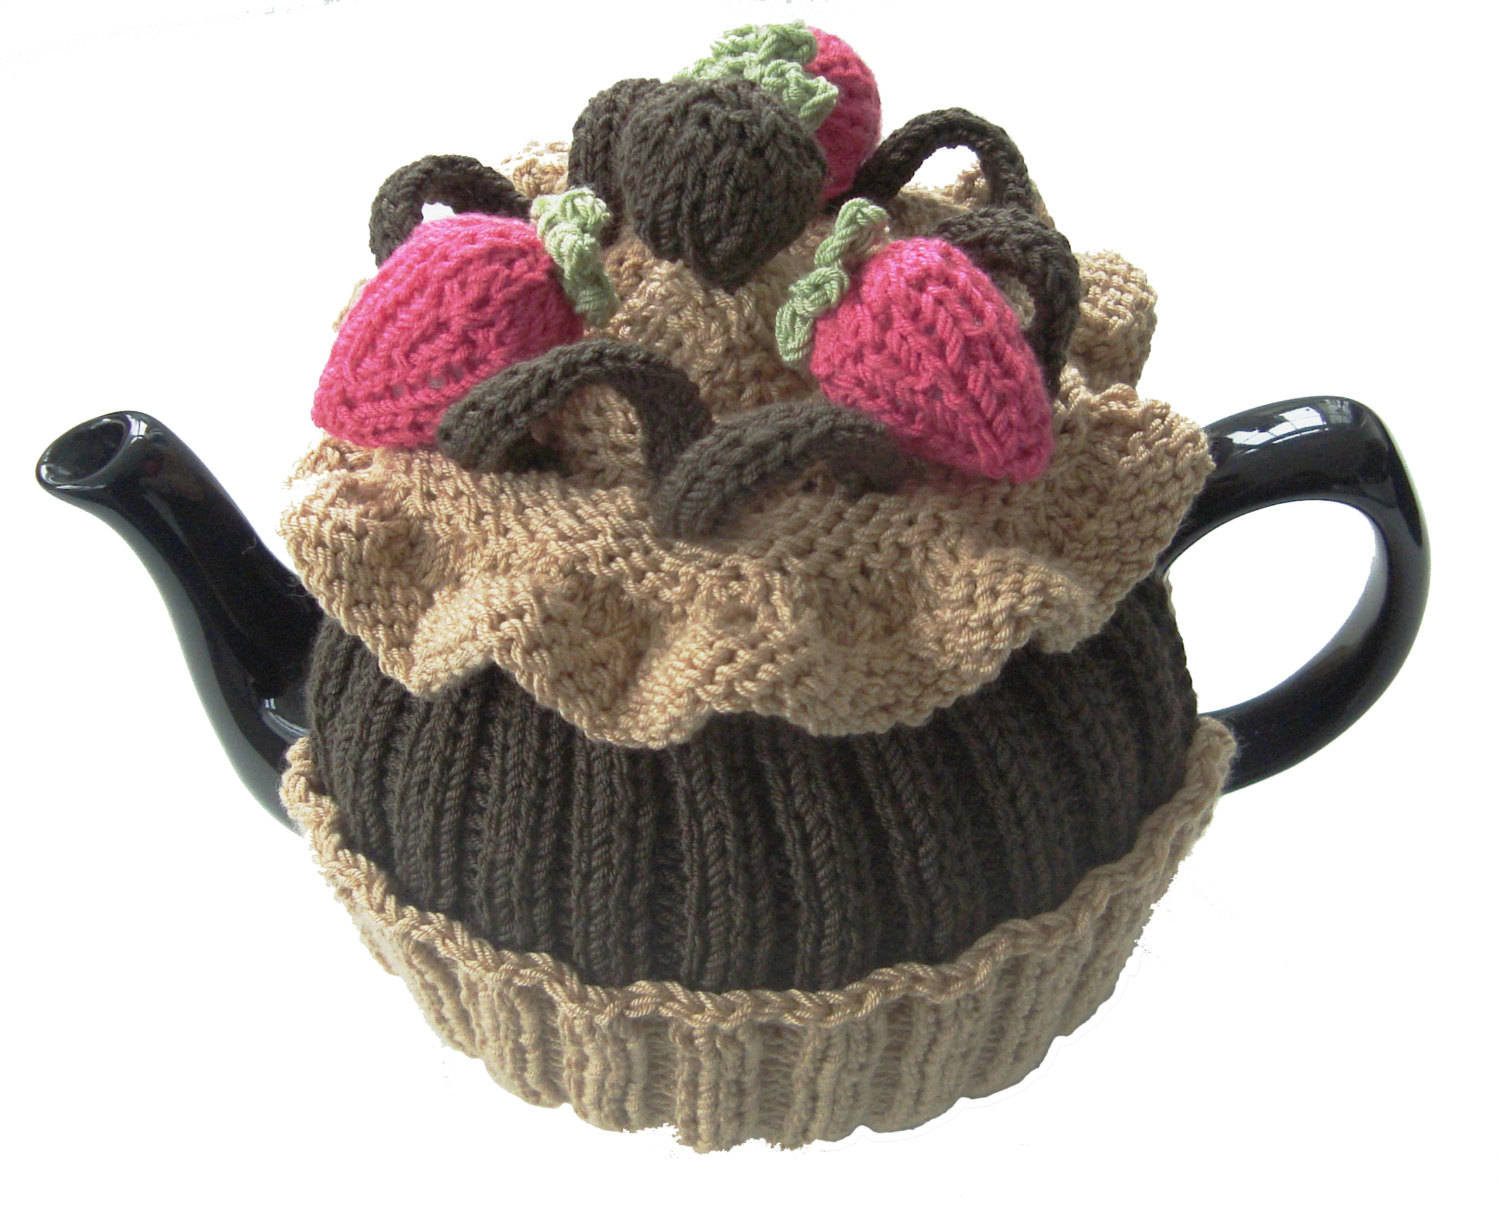 Tea Cosy Patterns To Knit Tea Cosy Knitting Pattern Chocolate Cup Cake Pdf Knitting Pattern